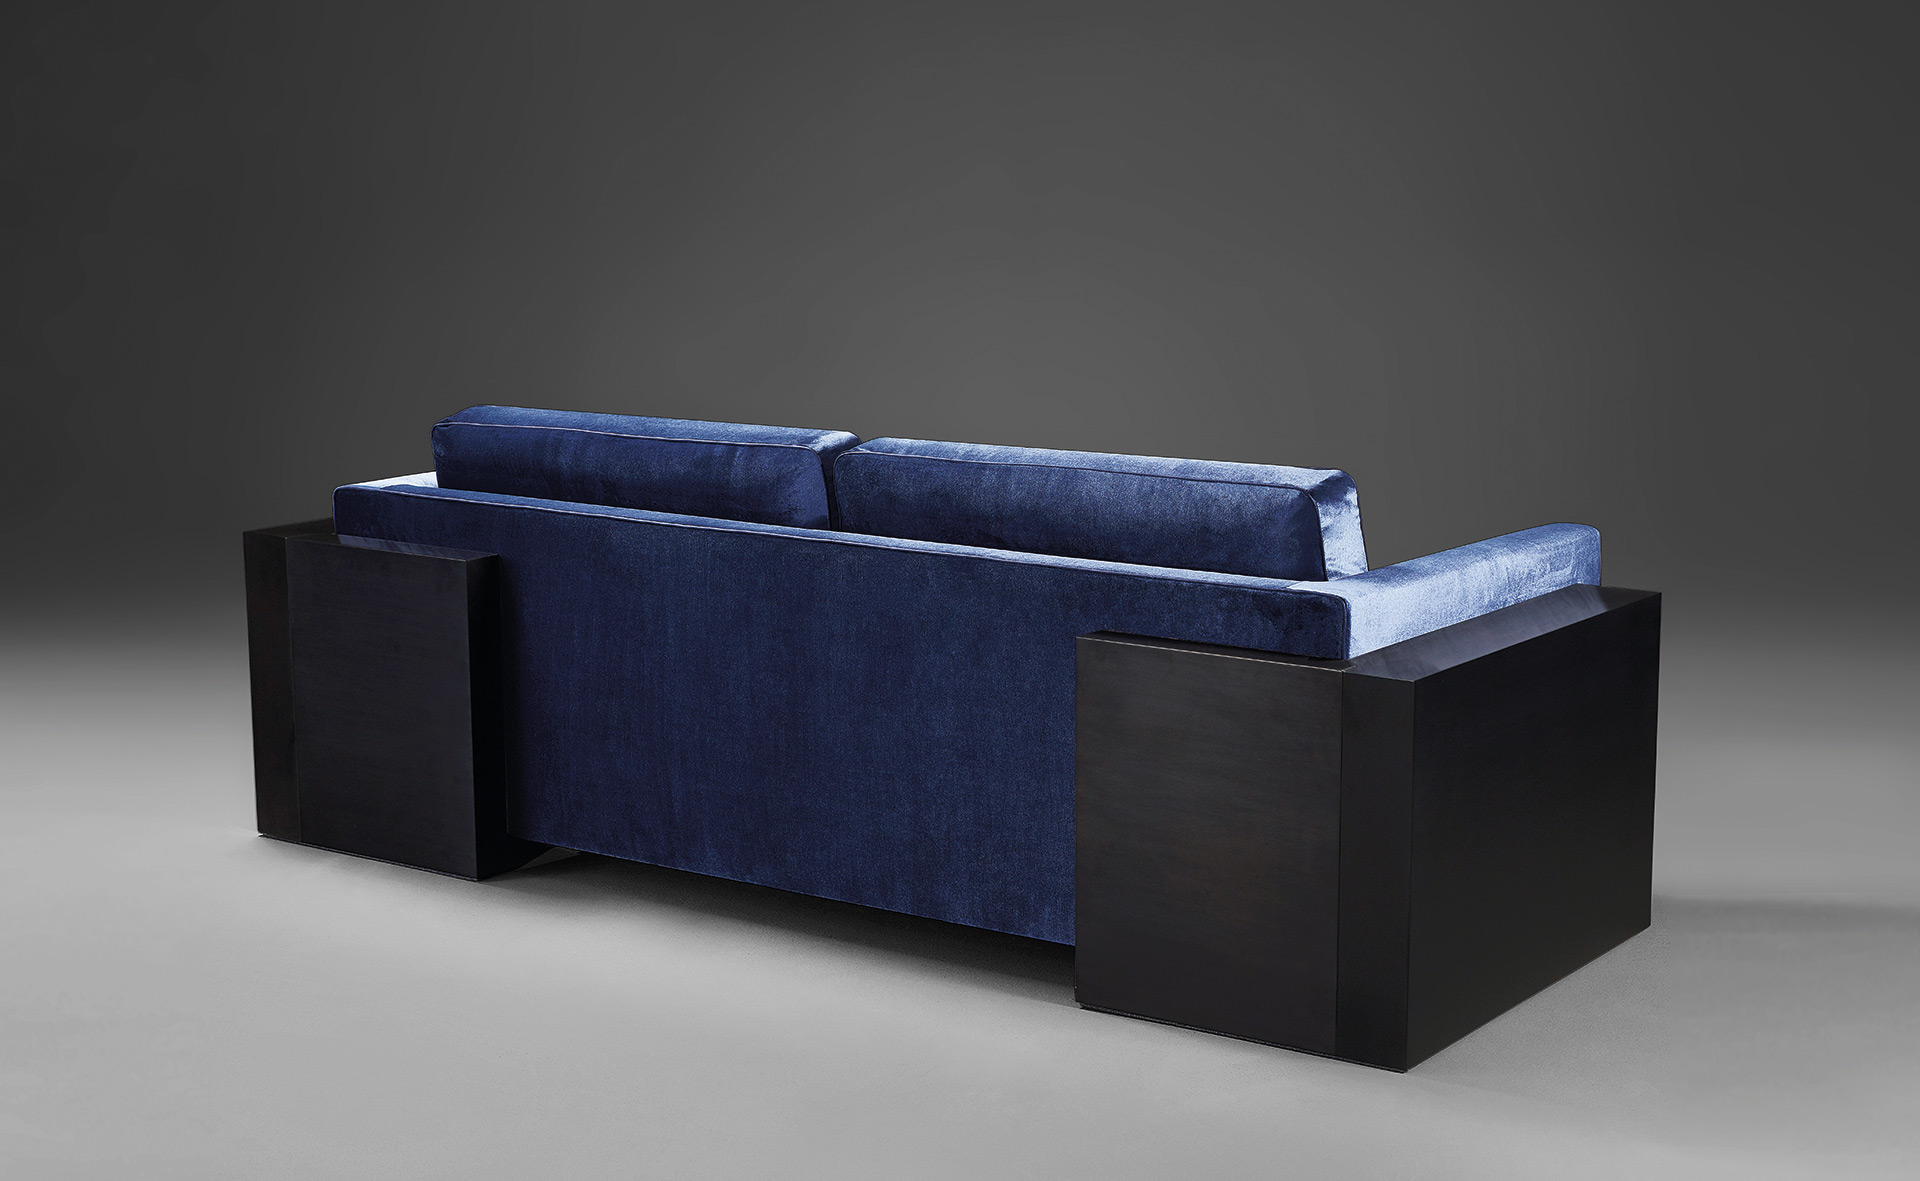 Ipparco is a wooden sofa with seat and back cushions in fabric, from Promemoria's Amaranthine Tales collection | Promemoria